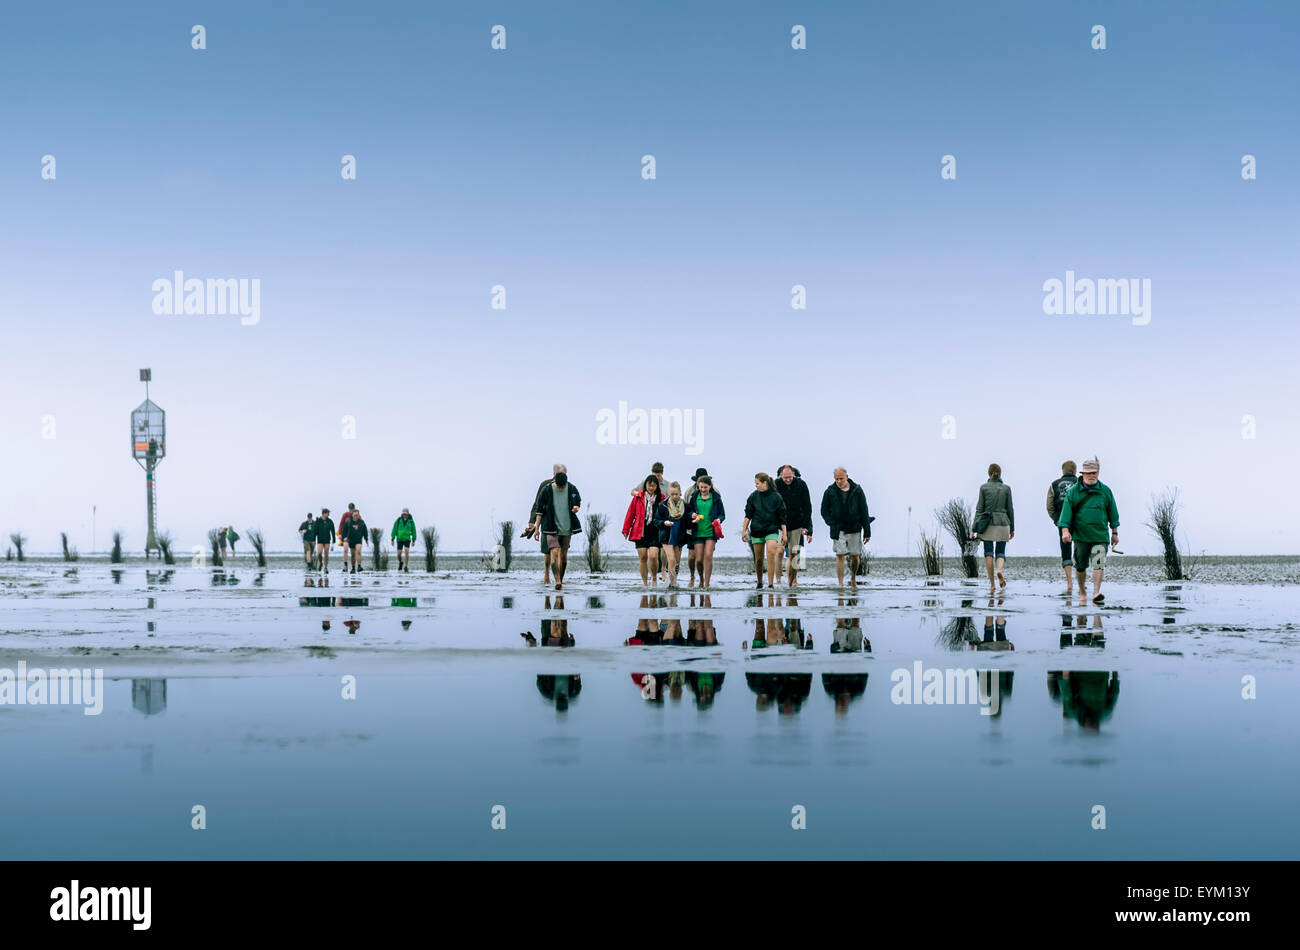 Germany, low things, new plant, Cuxhaven, wadden sea, mud flats, team, person, walk, Stock Photo